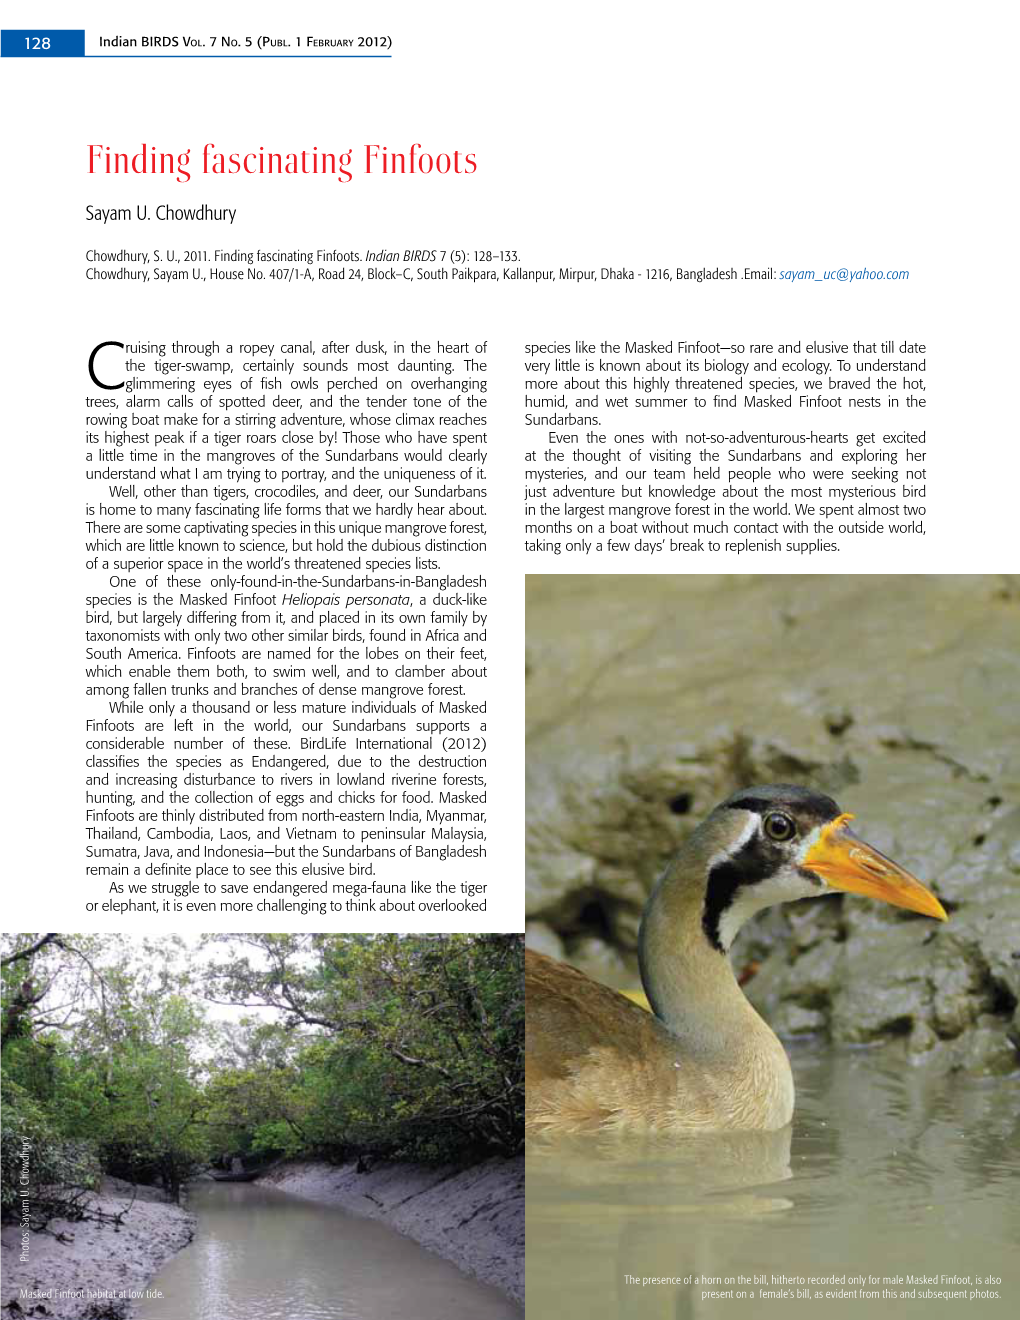 Finding Fascinating Finfoots